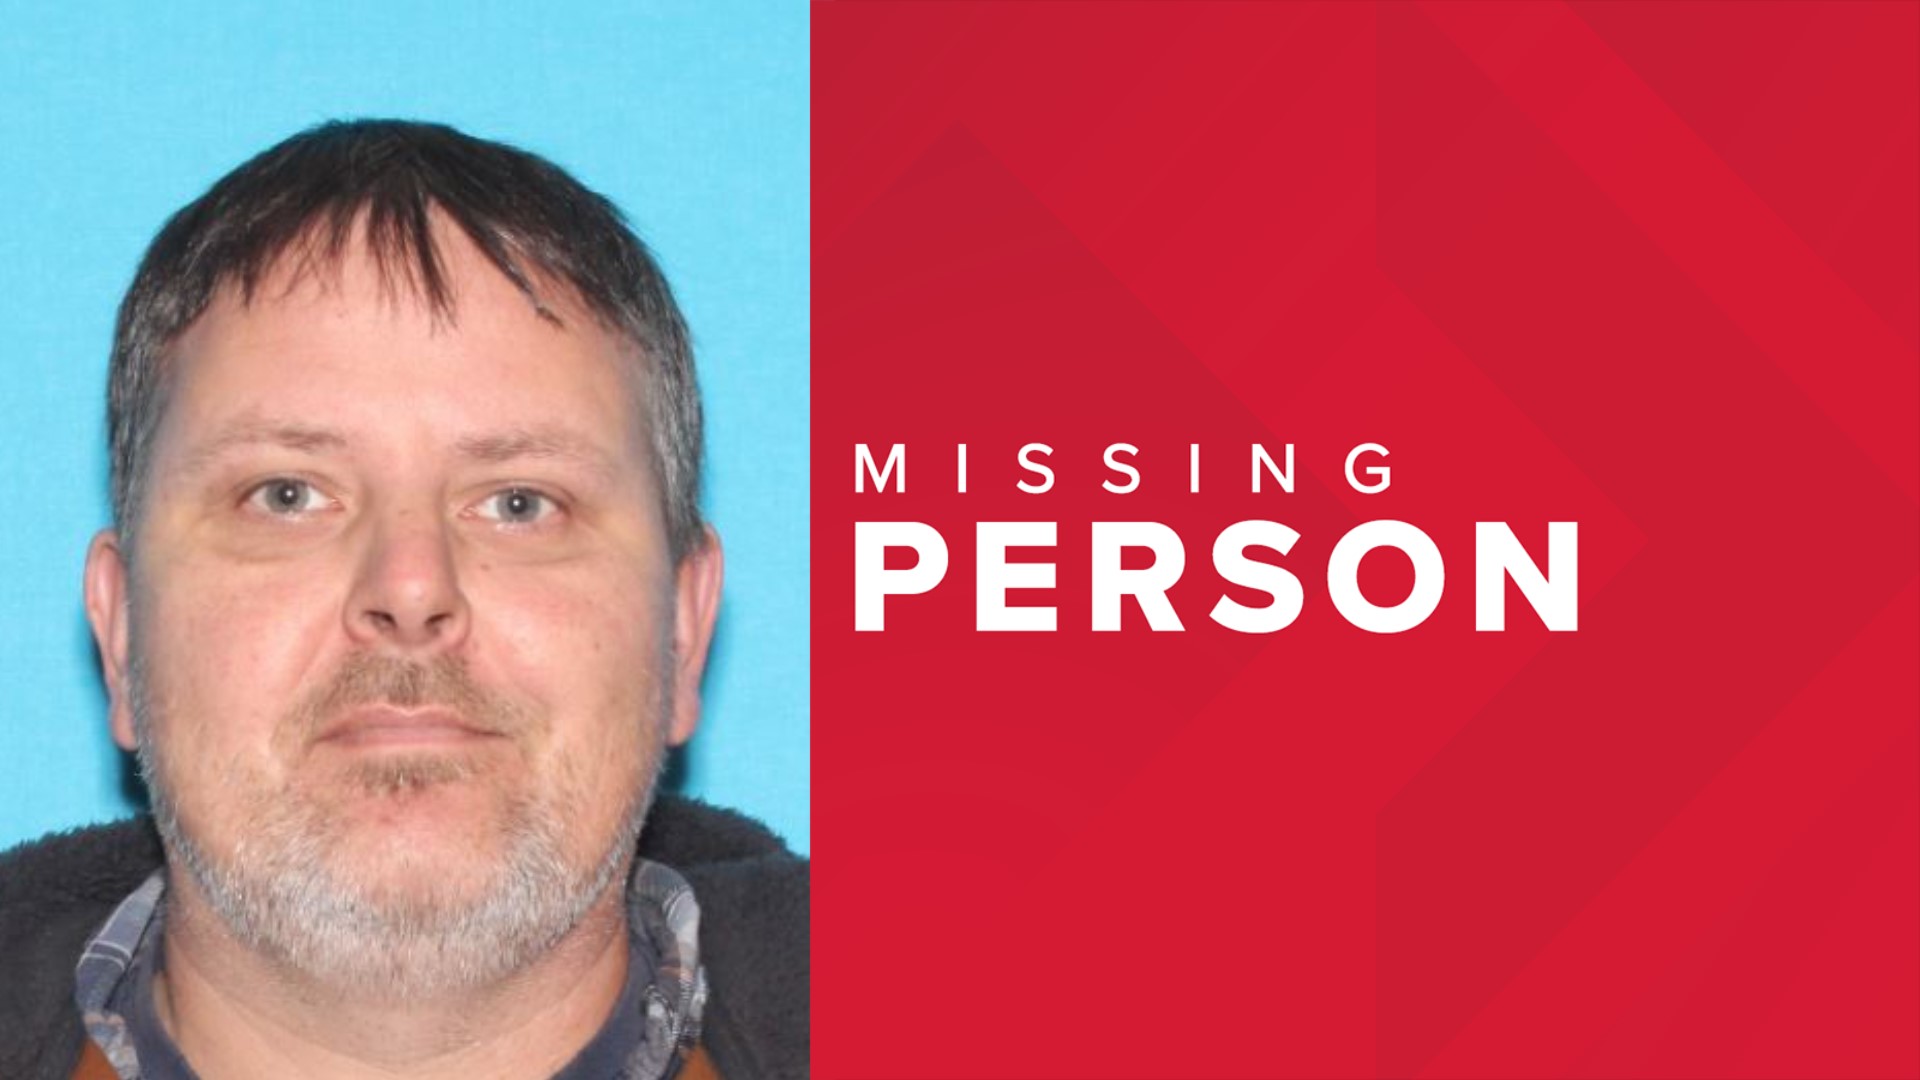 The Penobscot County Sheriff's Office said Jeremy Hill, 47, was last seen on April 18.